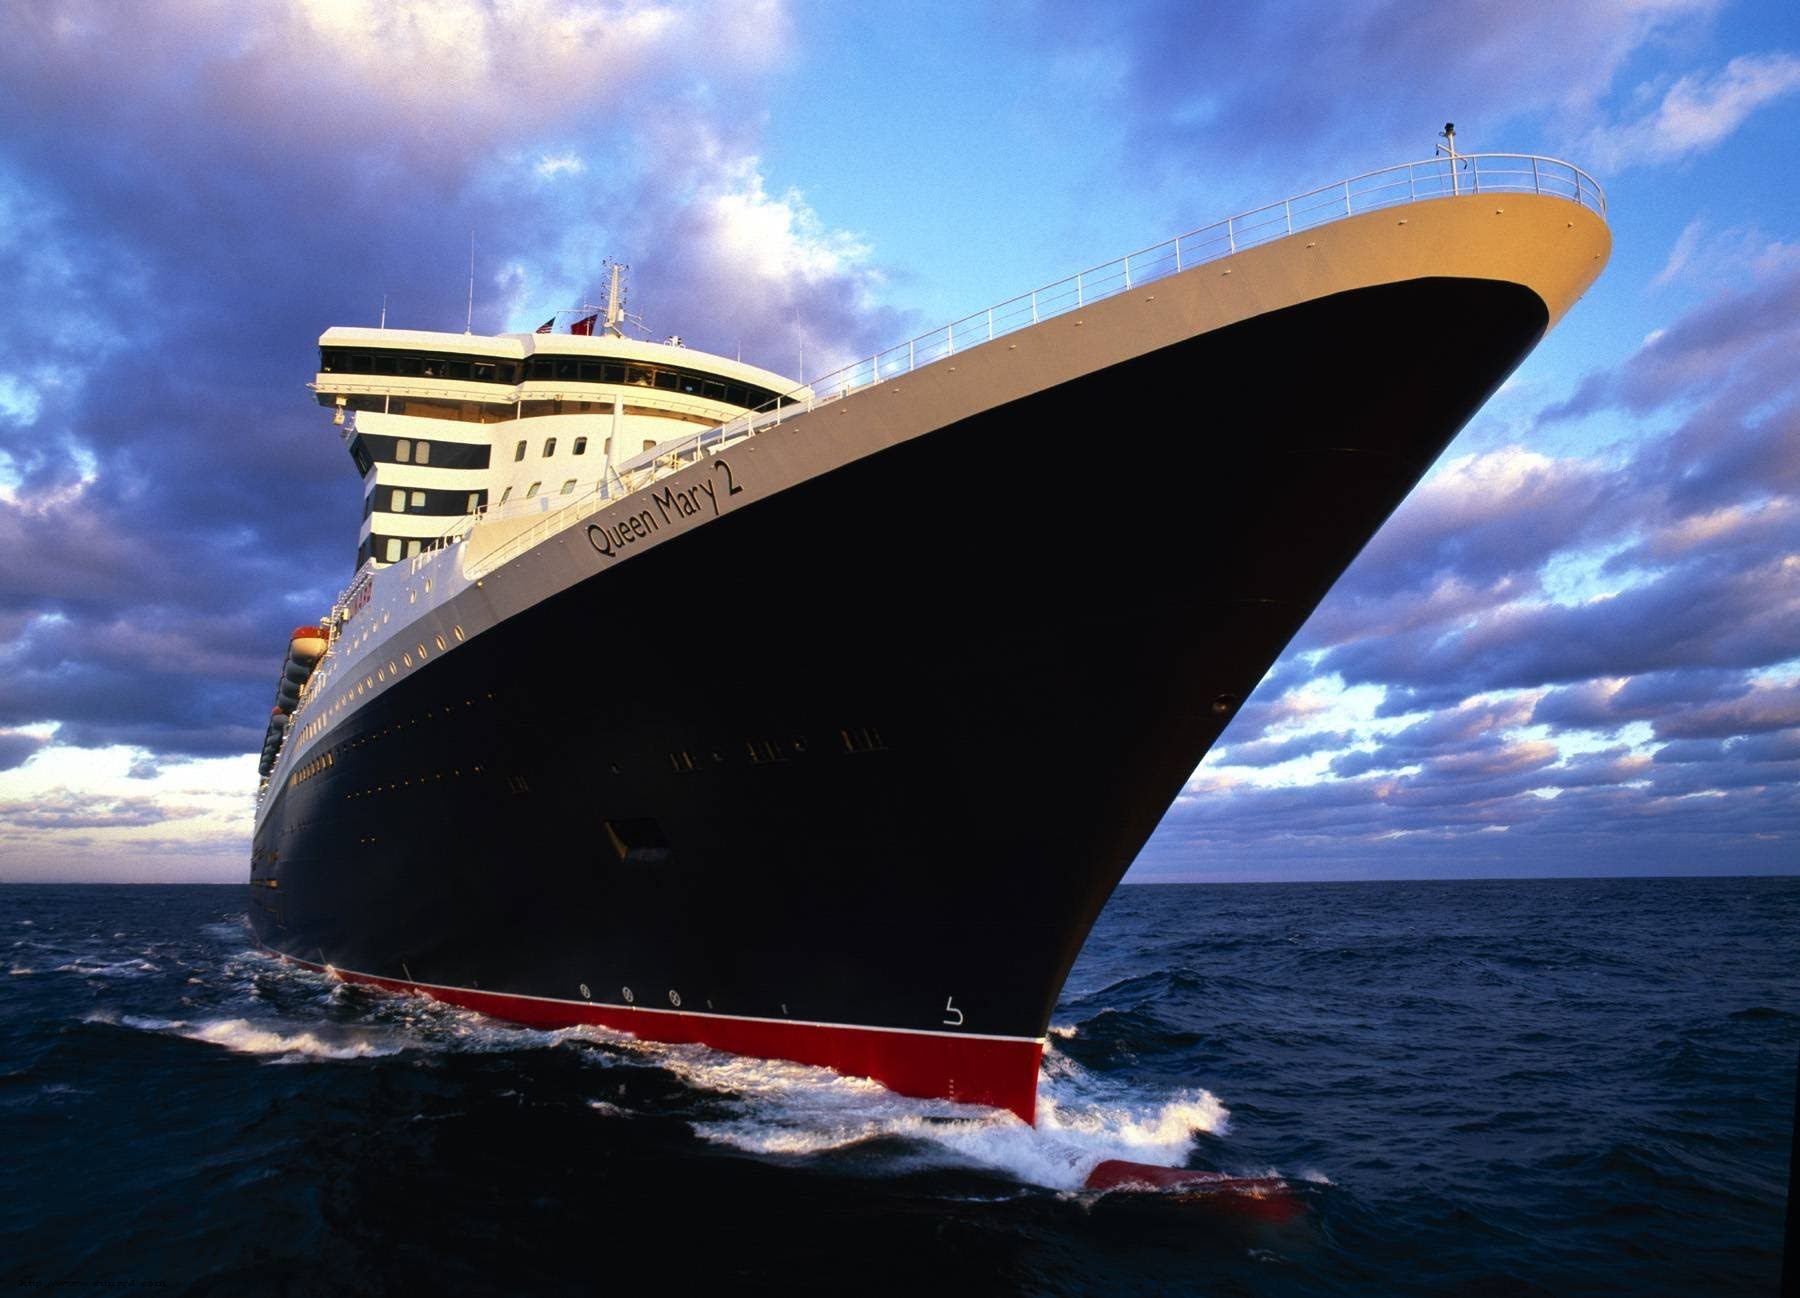 New Culinary Experiences to Debut on Cunard's Queen Mary 2 Remastered